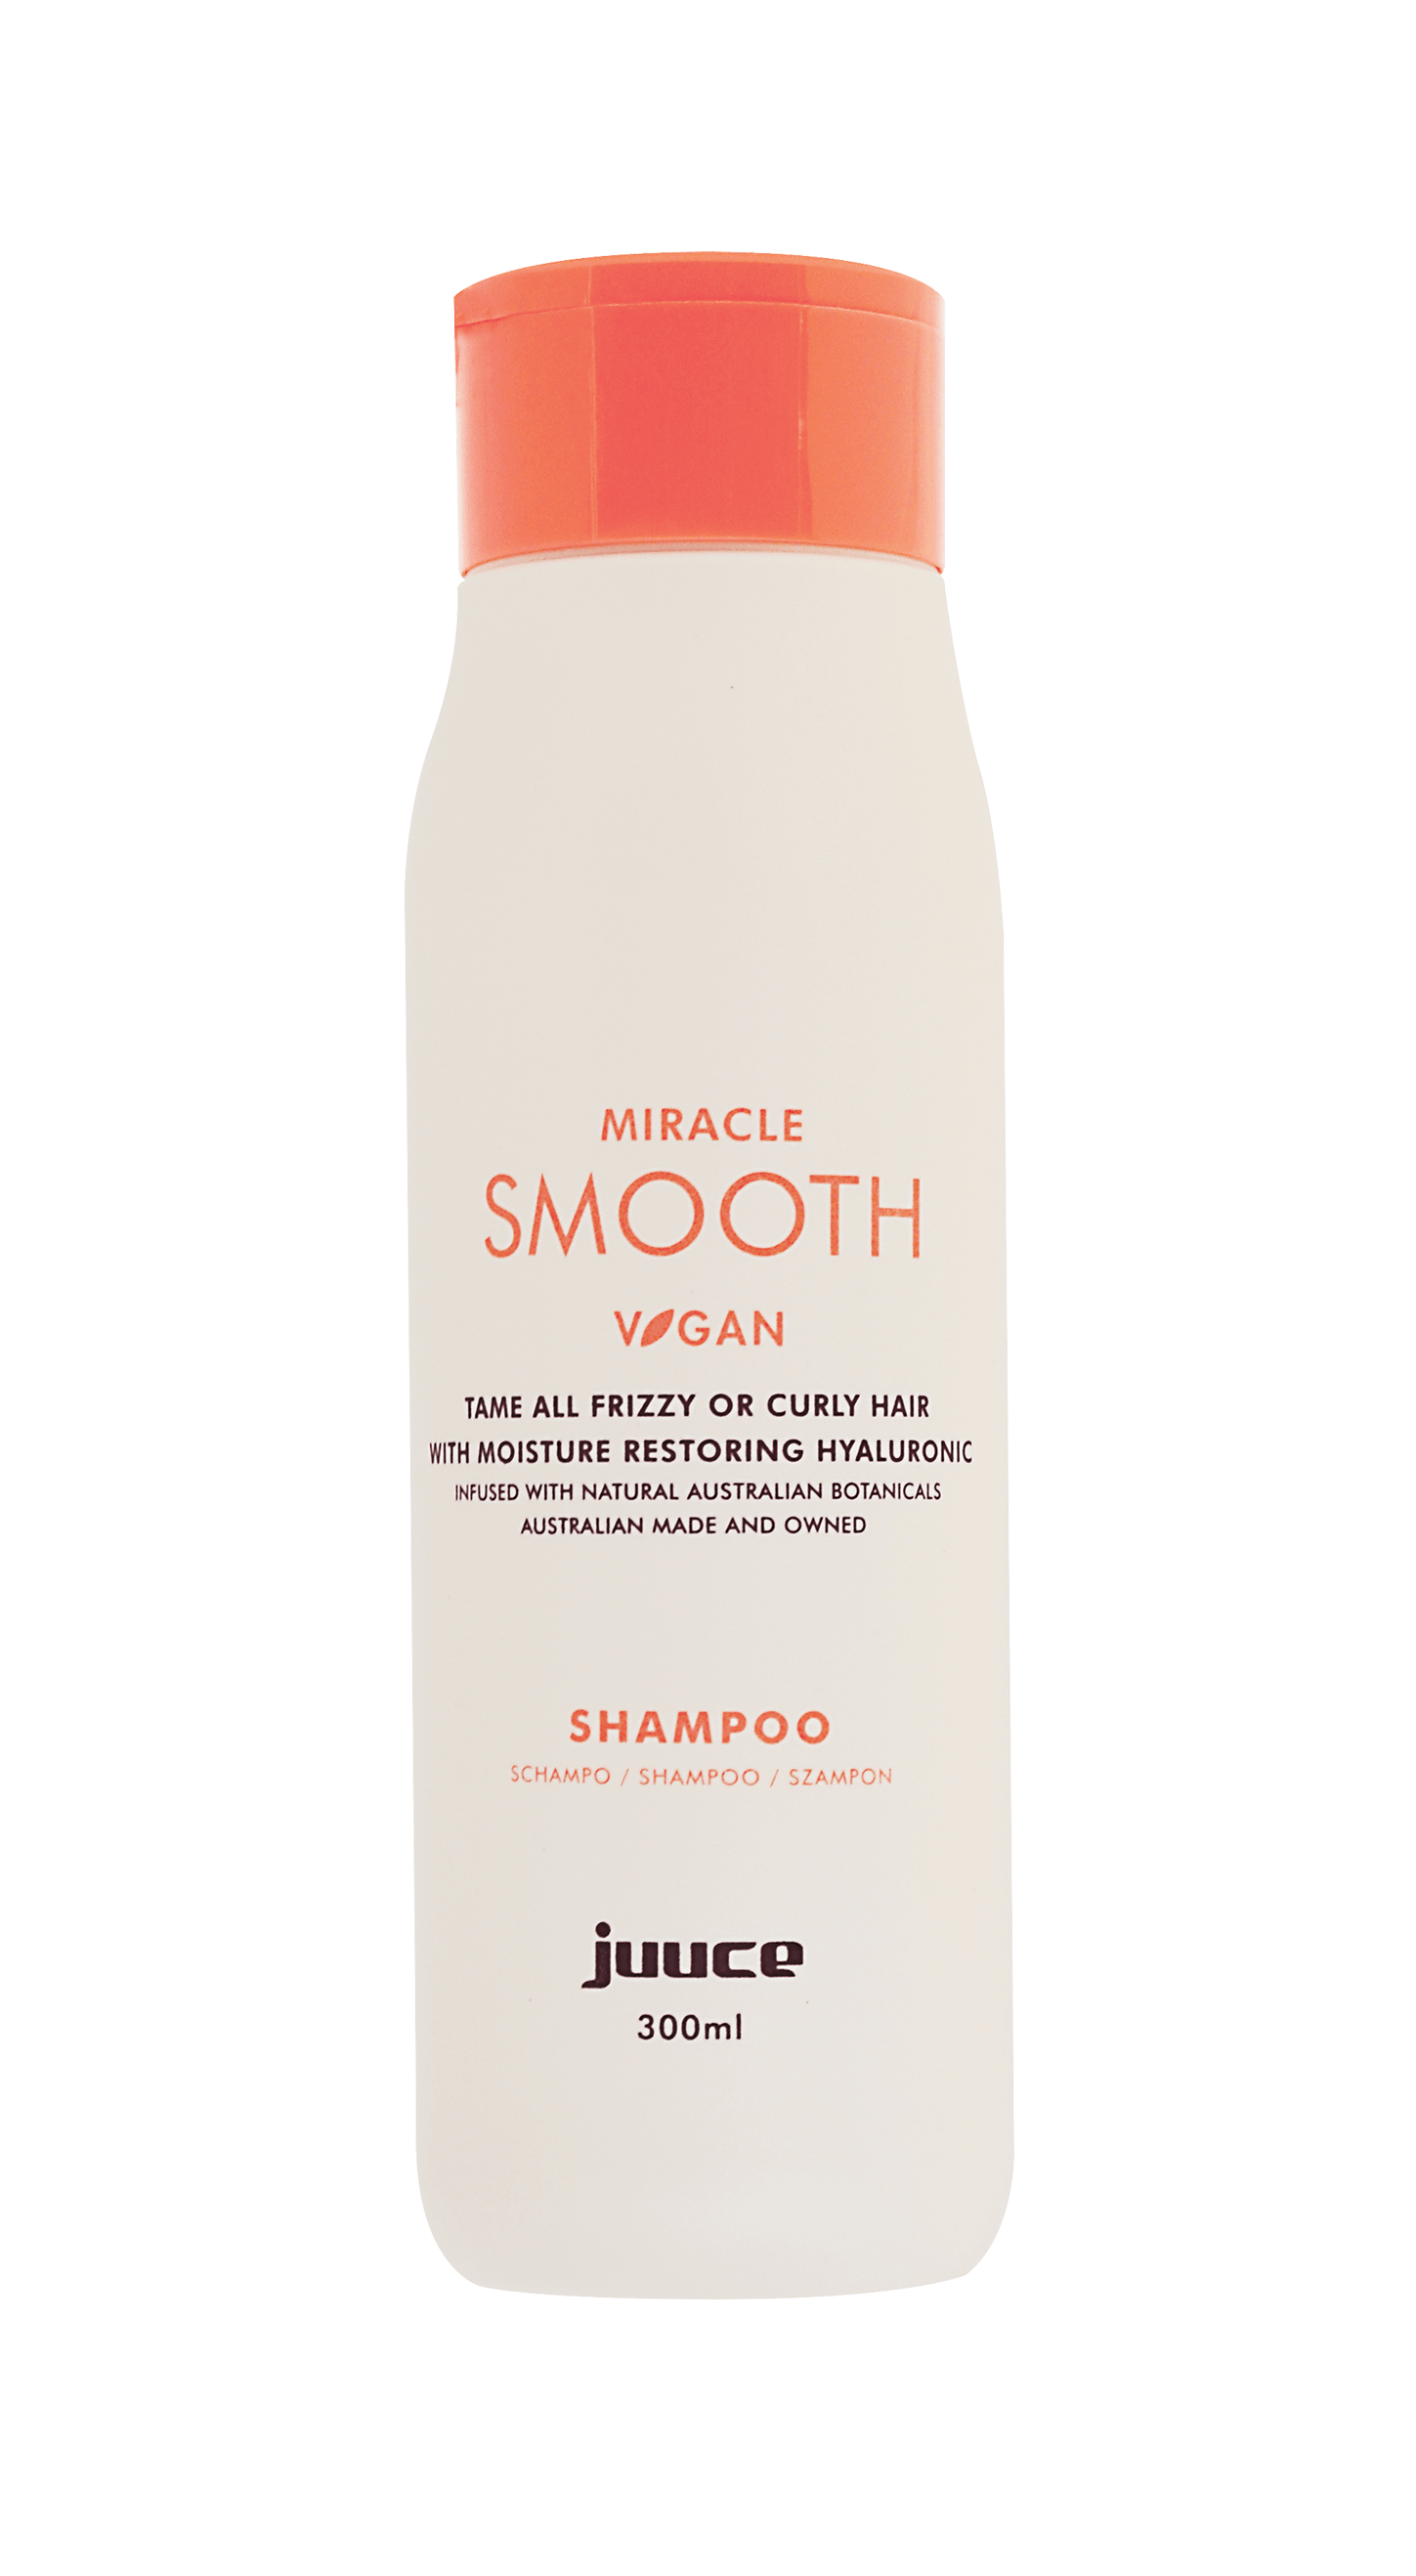 Juuce Miracle Smooth Shampoo 300ML (previously Miracle D.frizz)